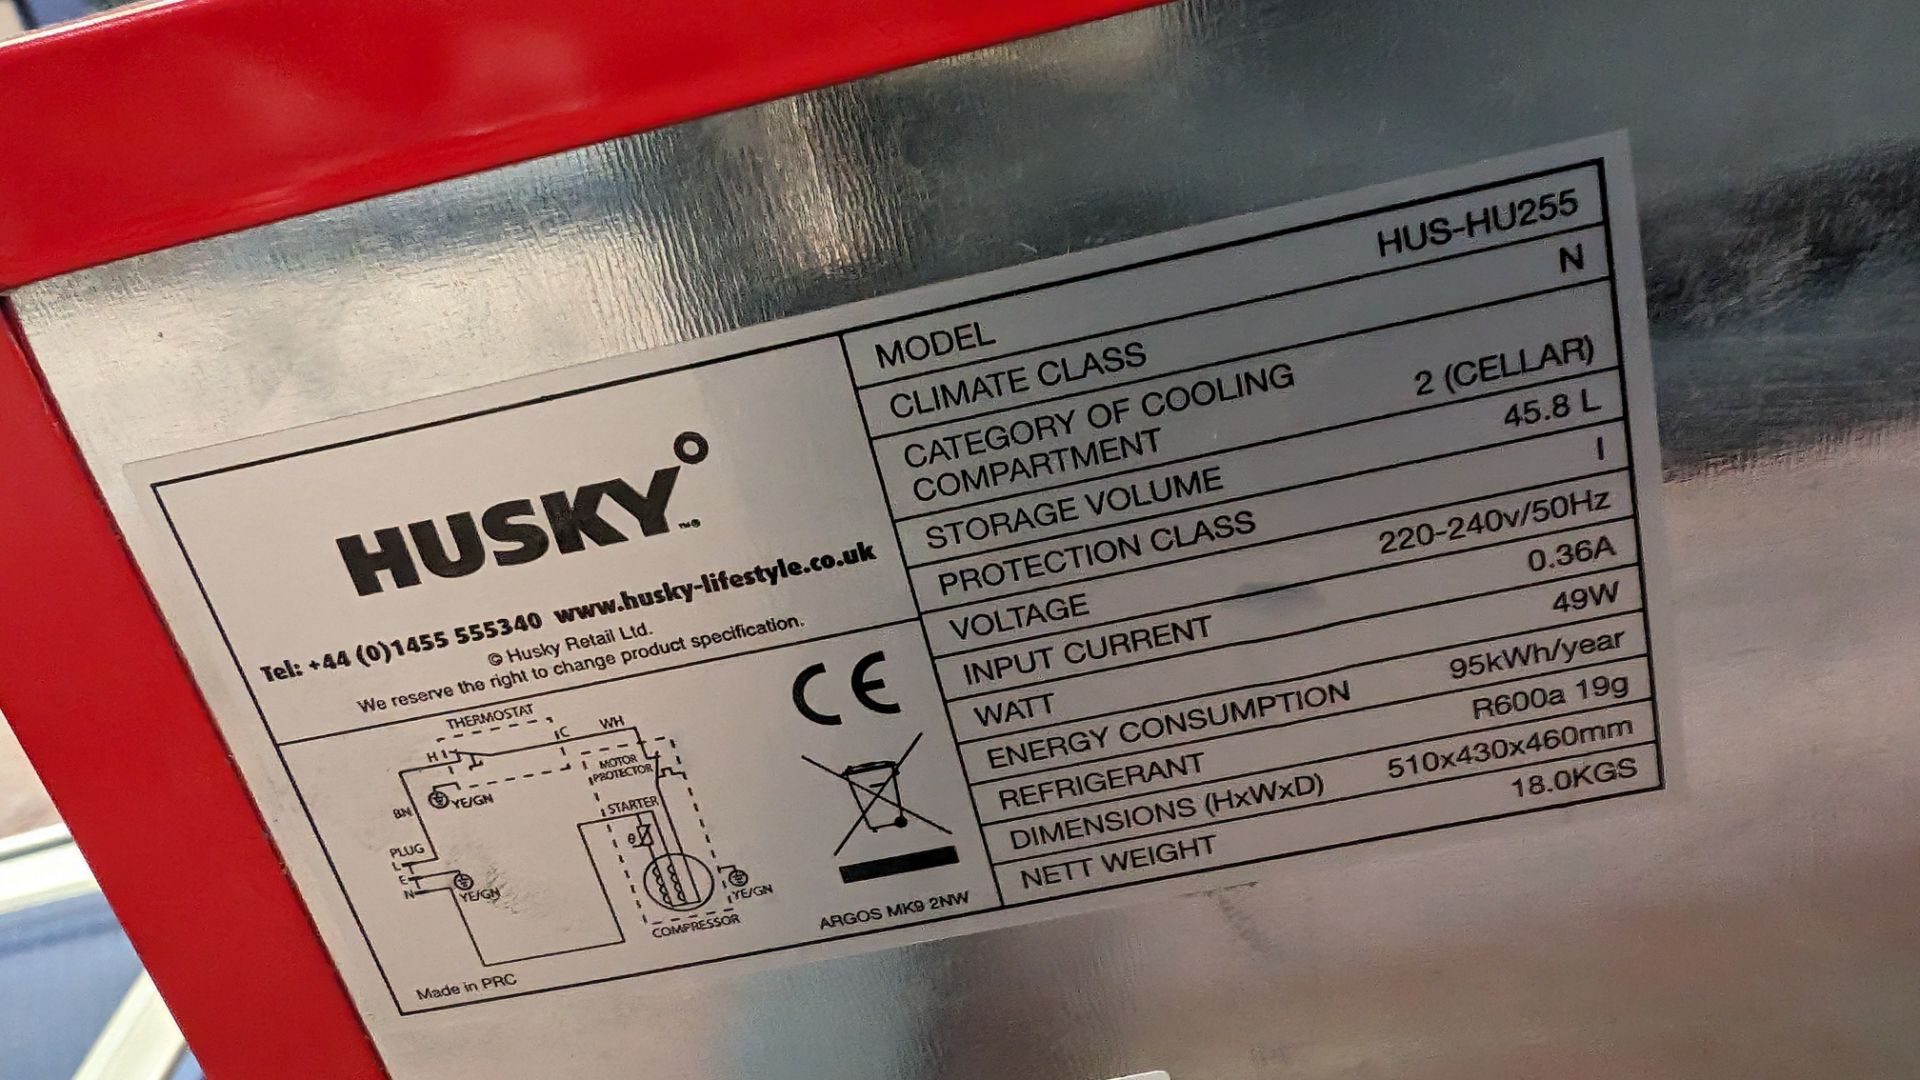 Husky clear front drinks fridge with Coca Cola branding - Image 6 of 6